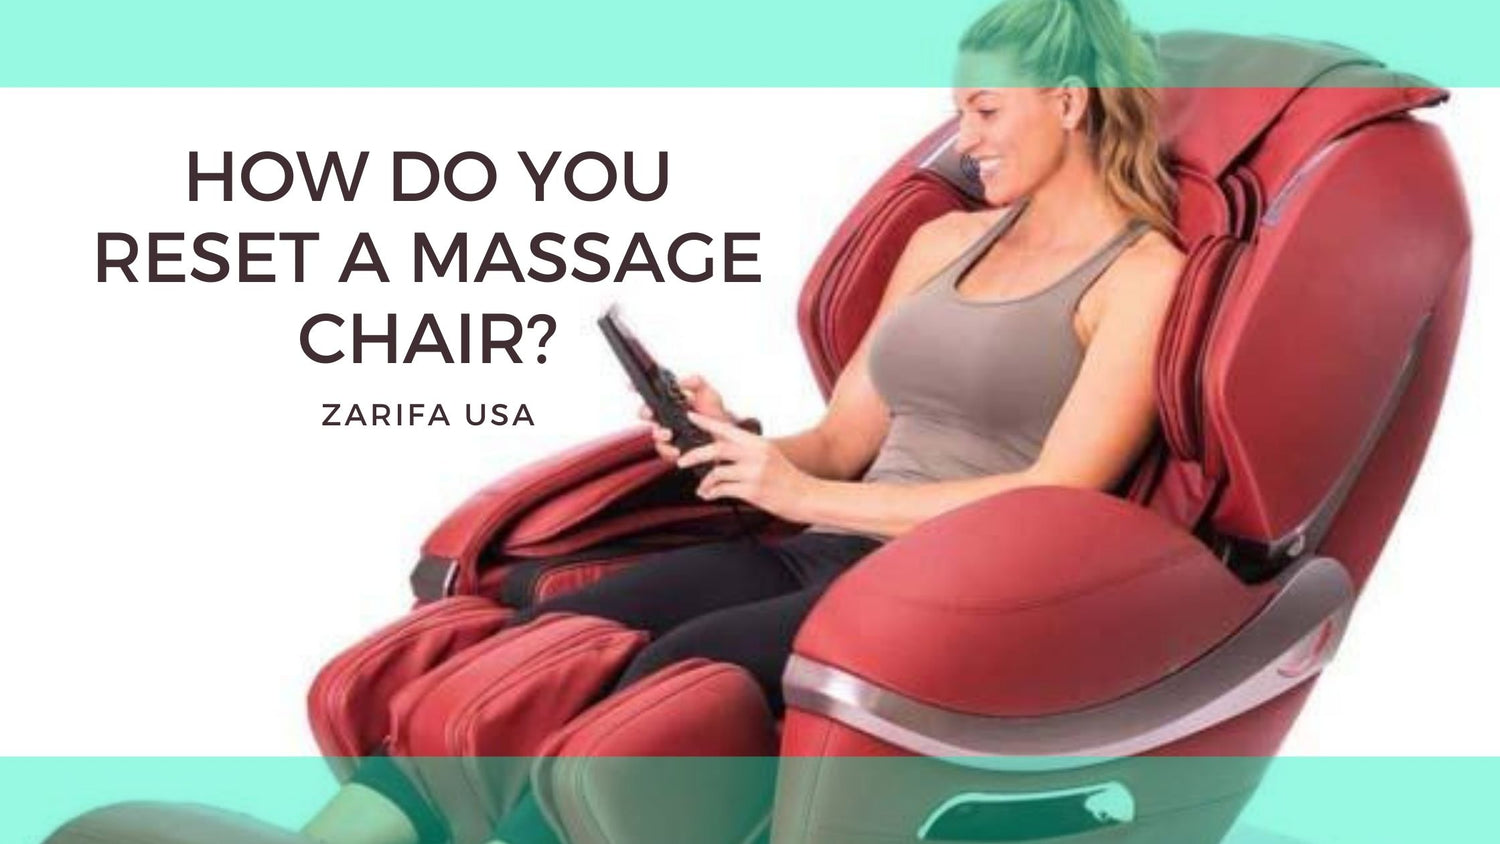 How Do You Reset A Massage Chair?